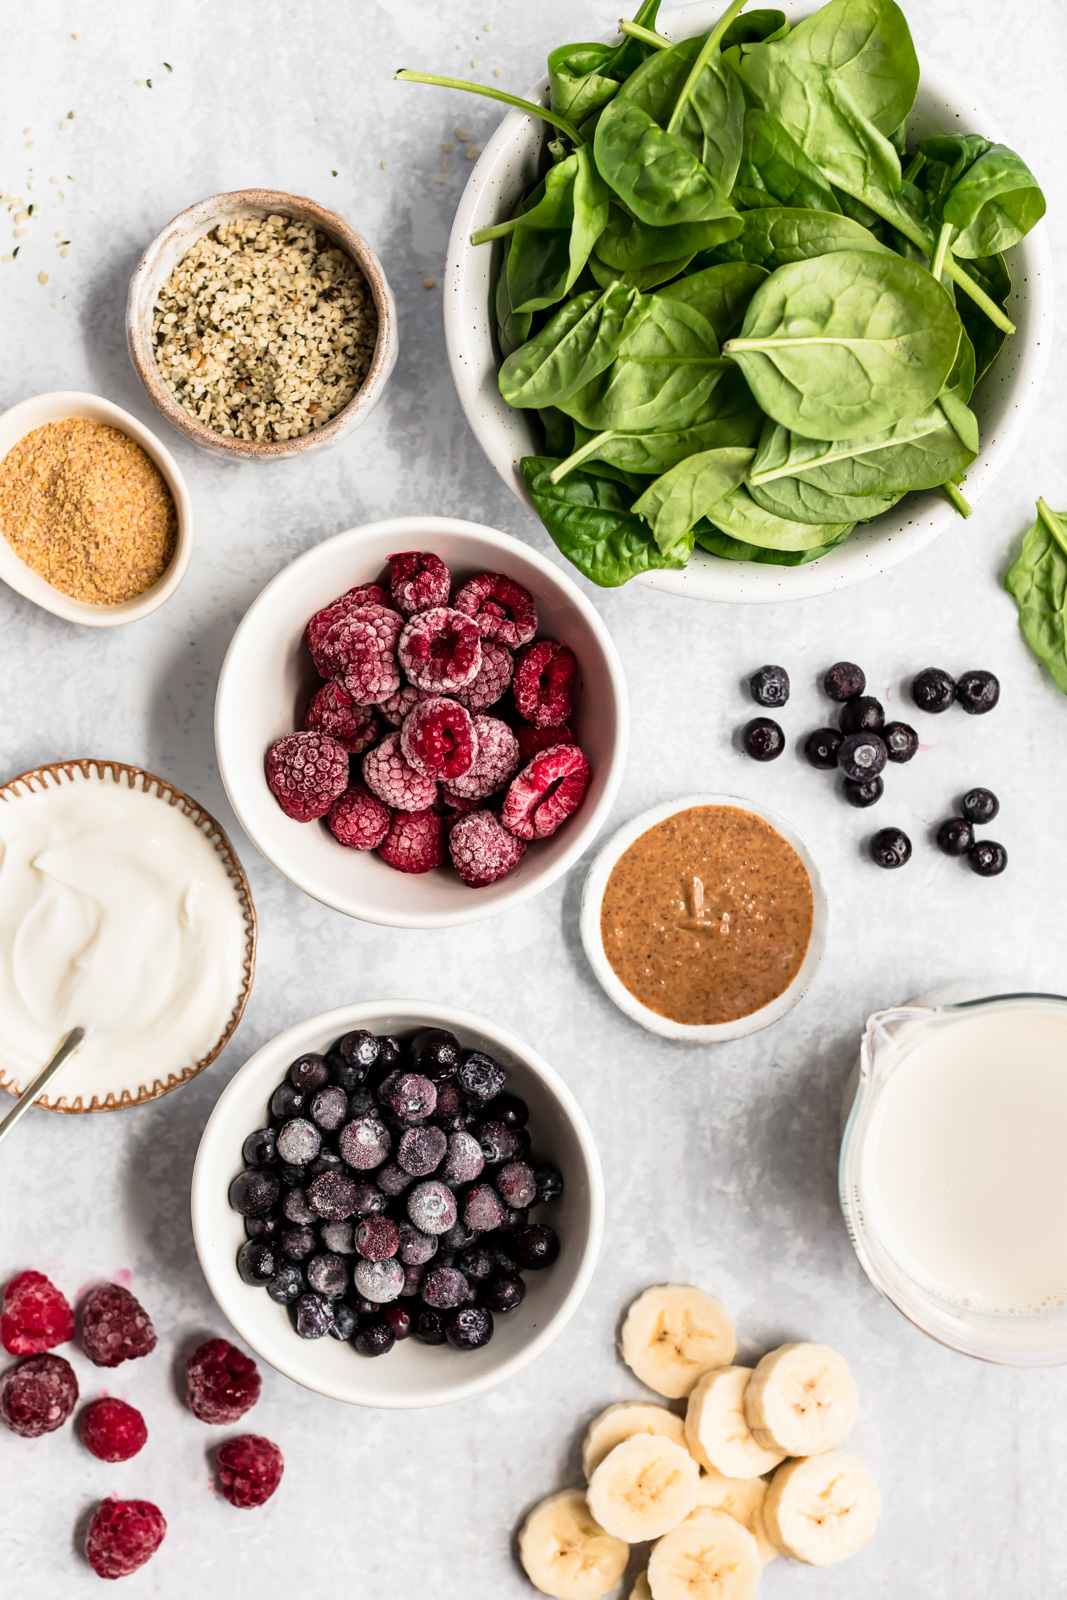 ingredients for a berry smoothie in bowls